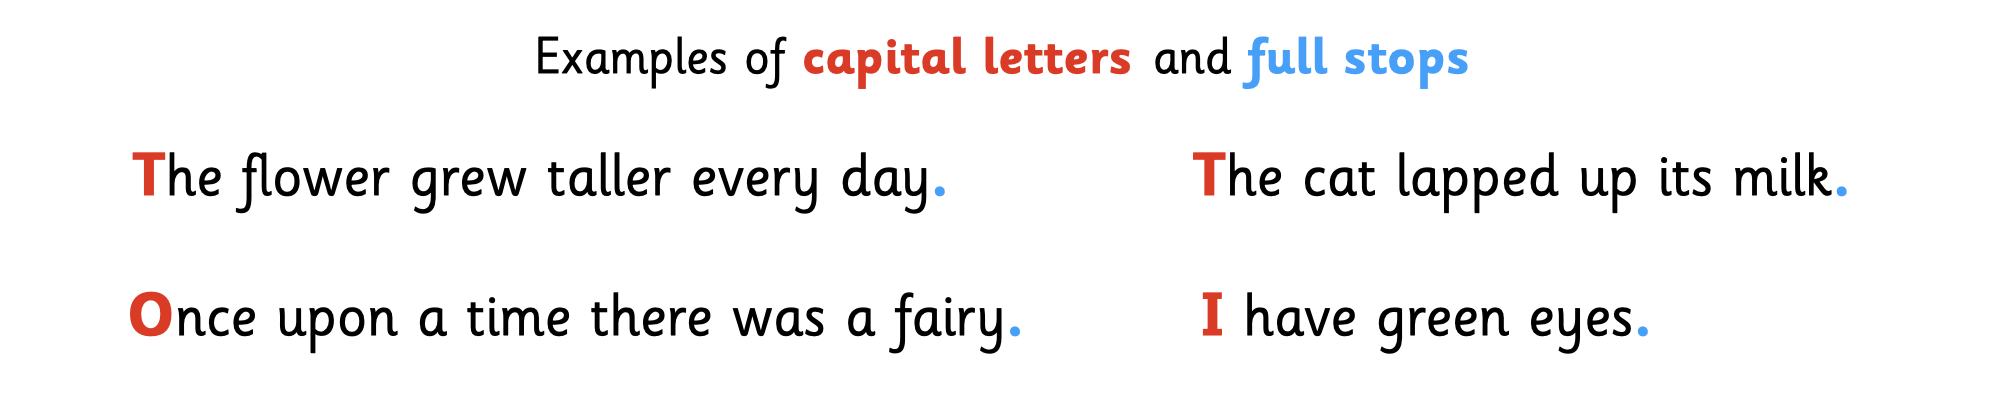 Examples of capital letters and full stops